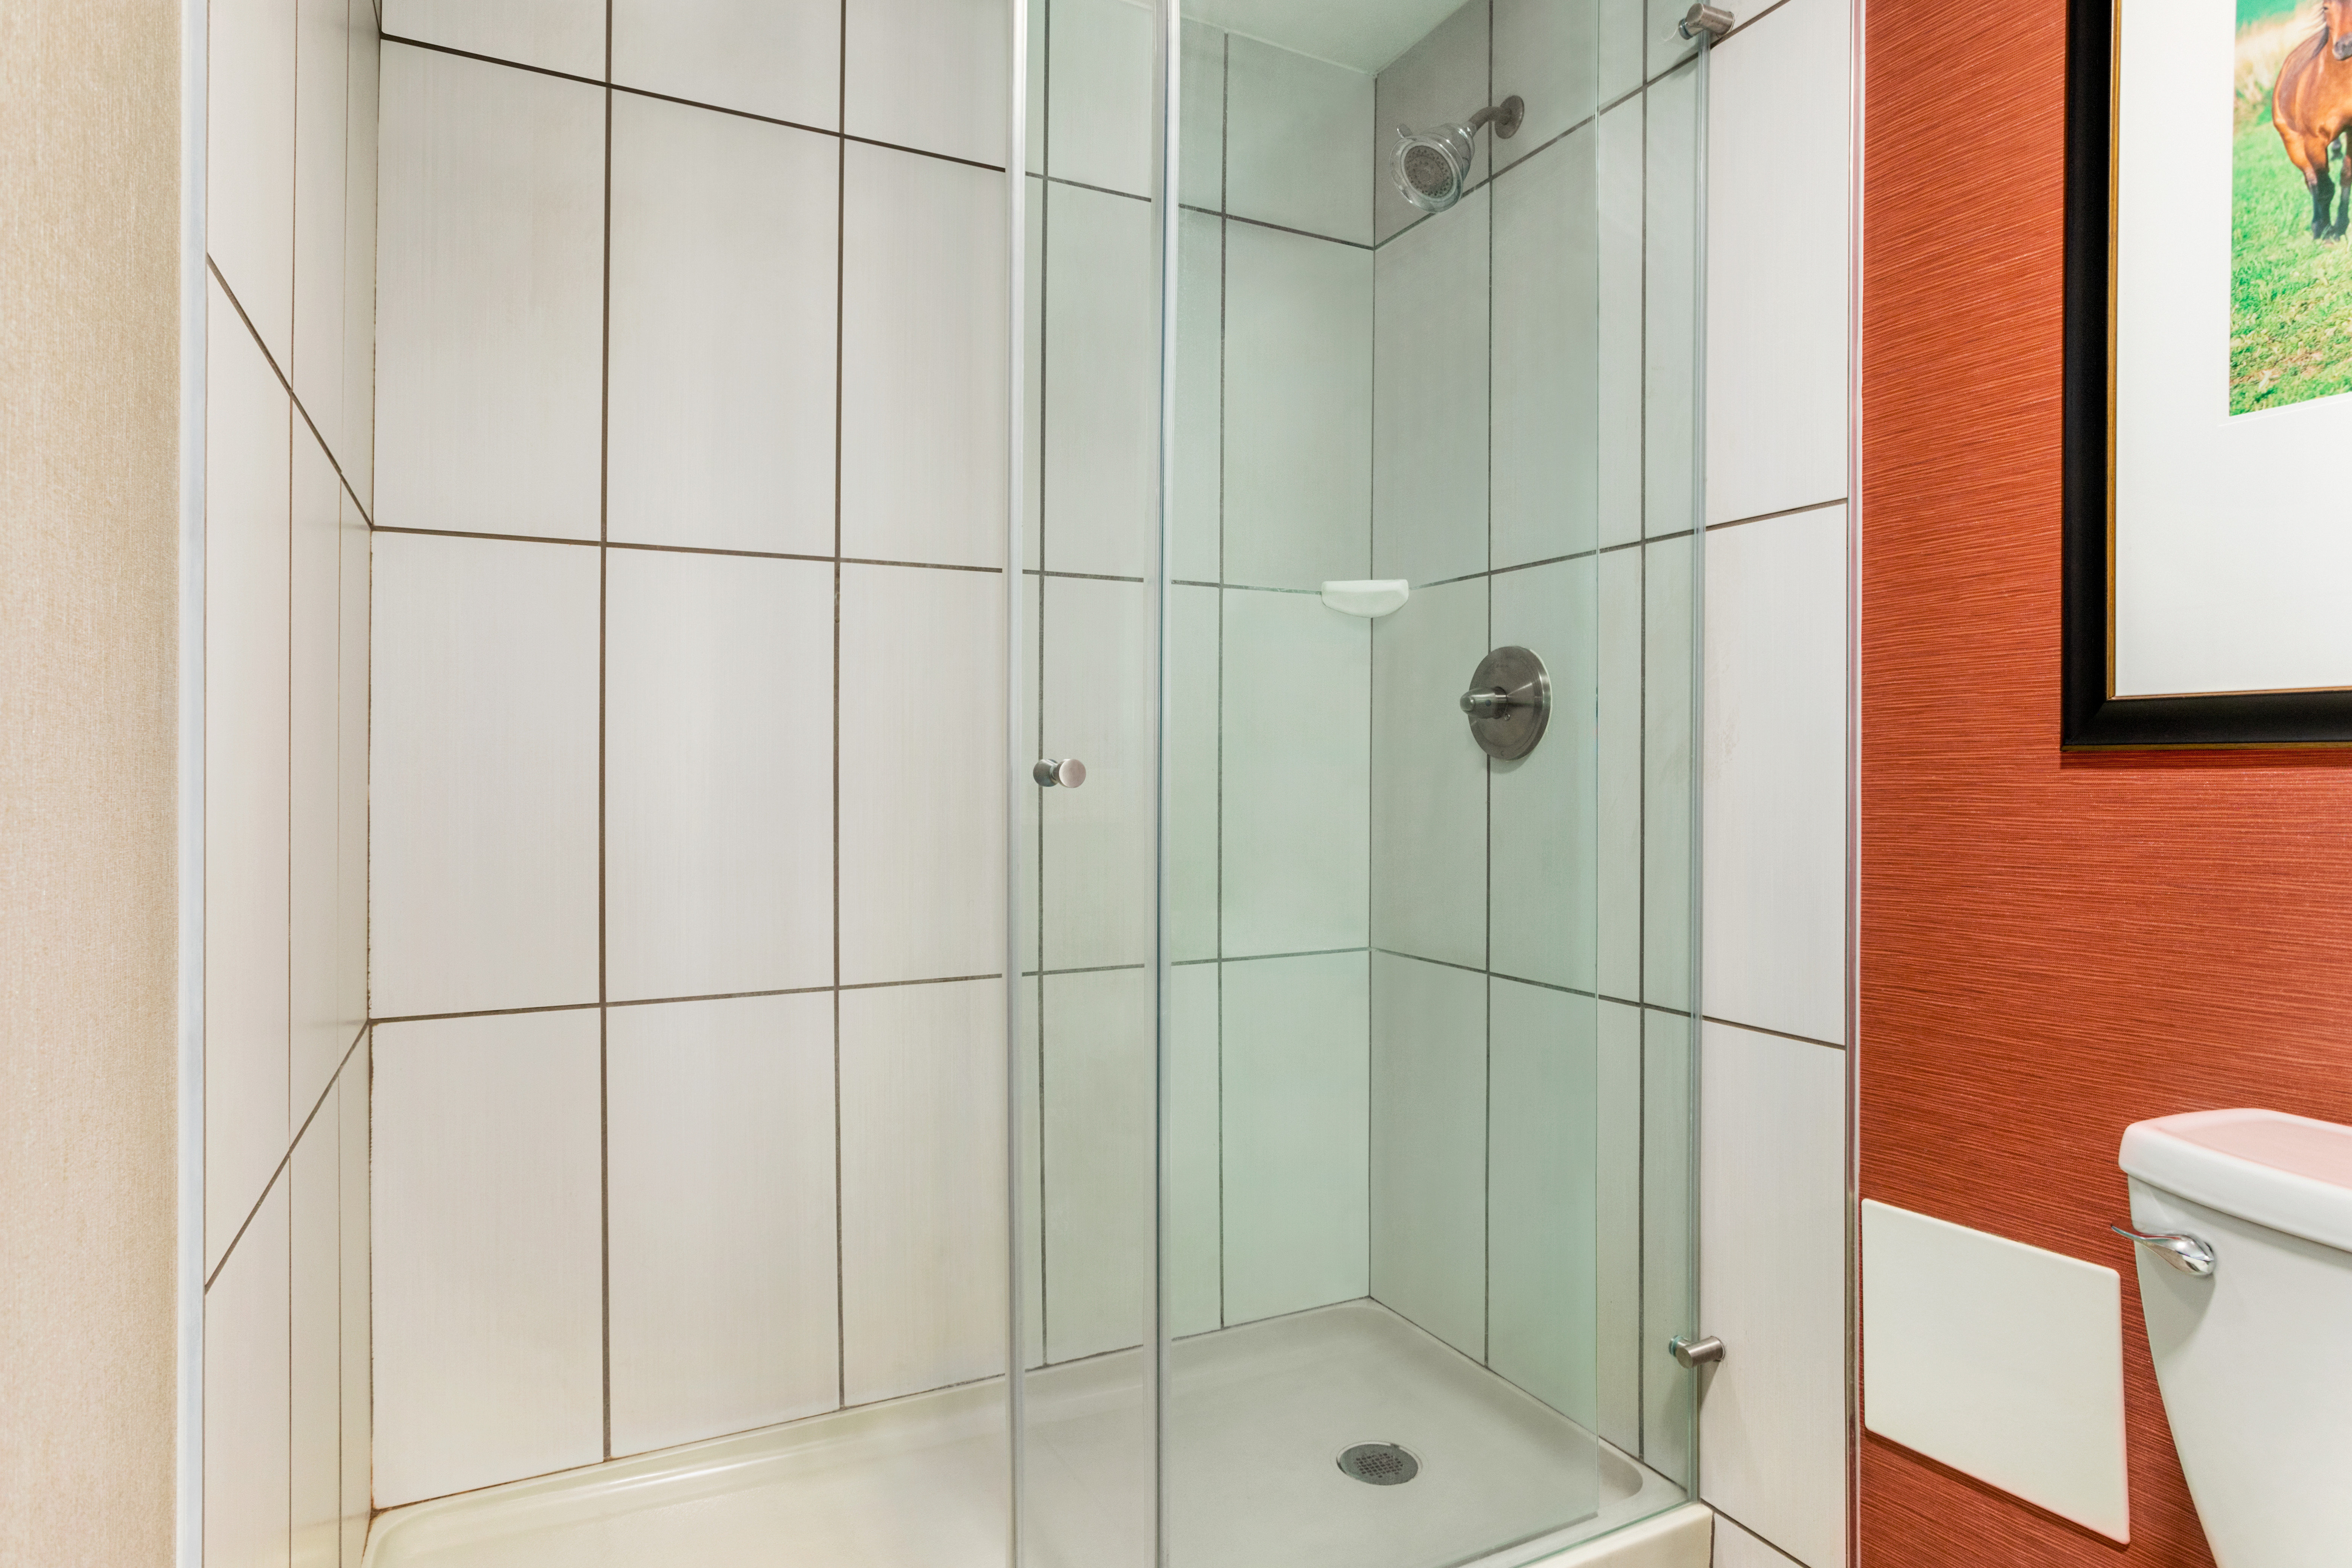 After a long day, rejuvenate in our guest room bathrooms.